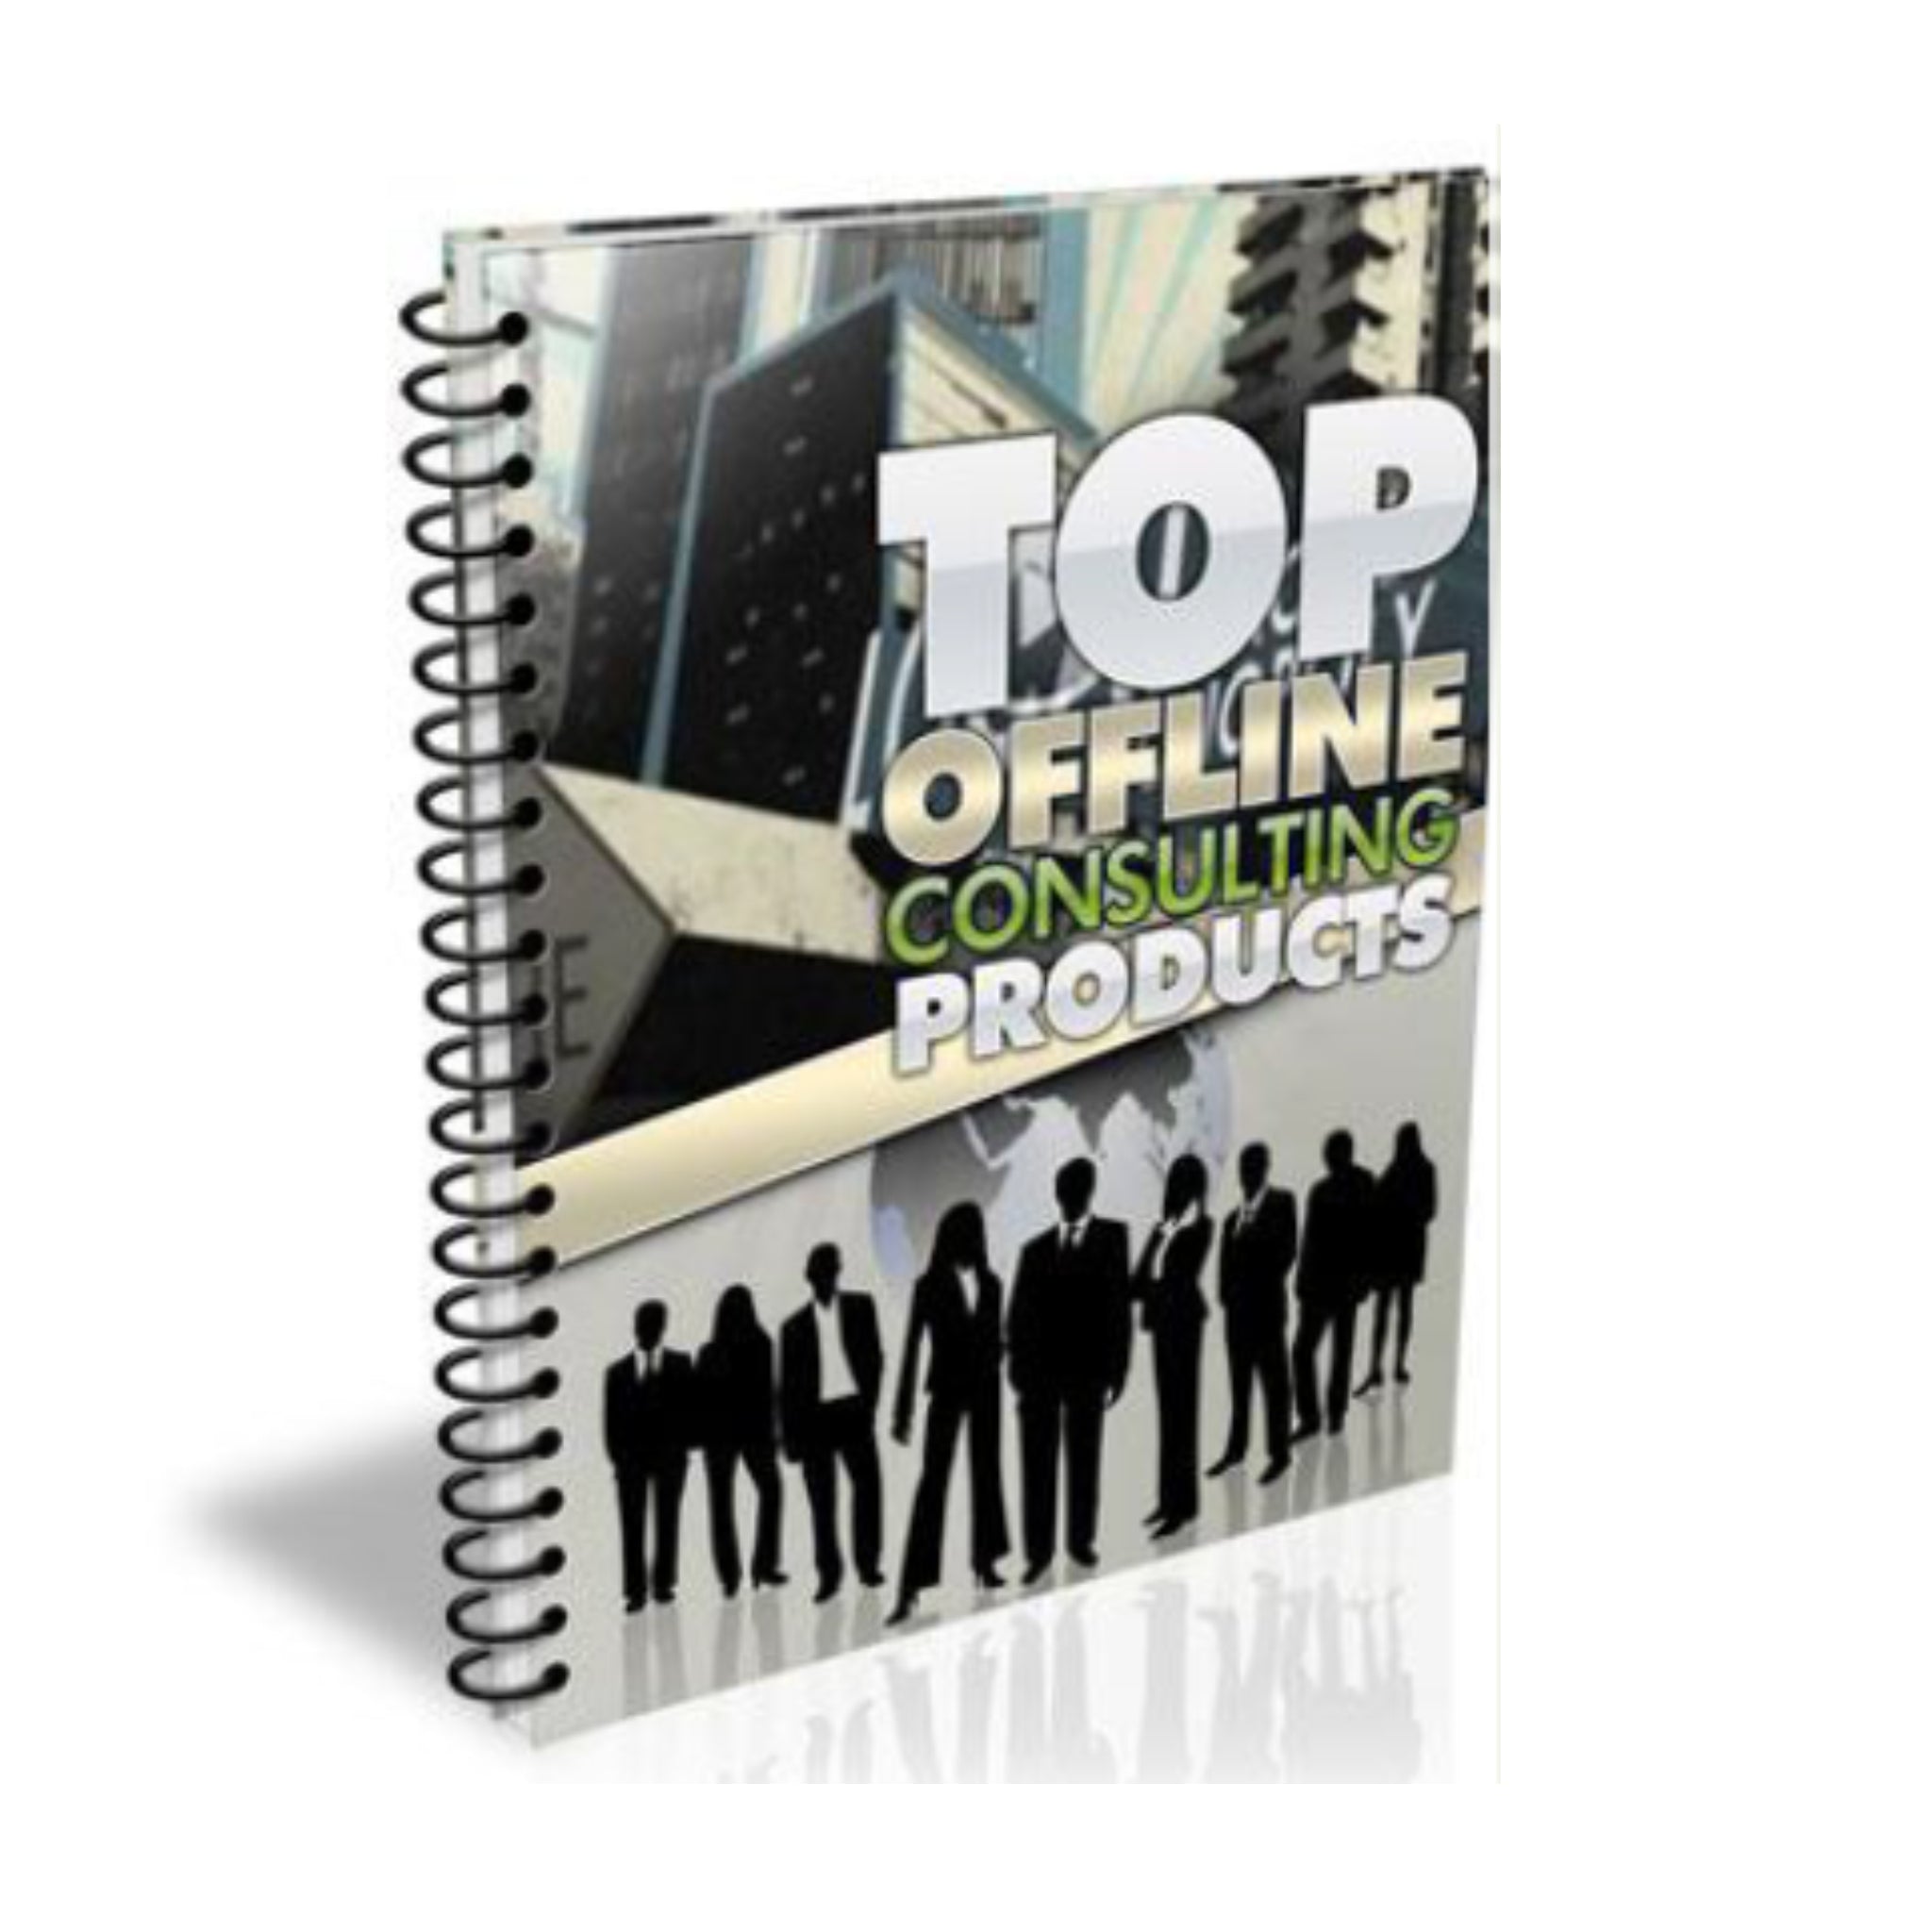 Top Offline Consulting Products Ebook